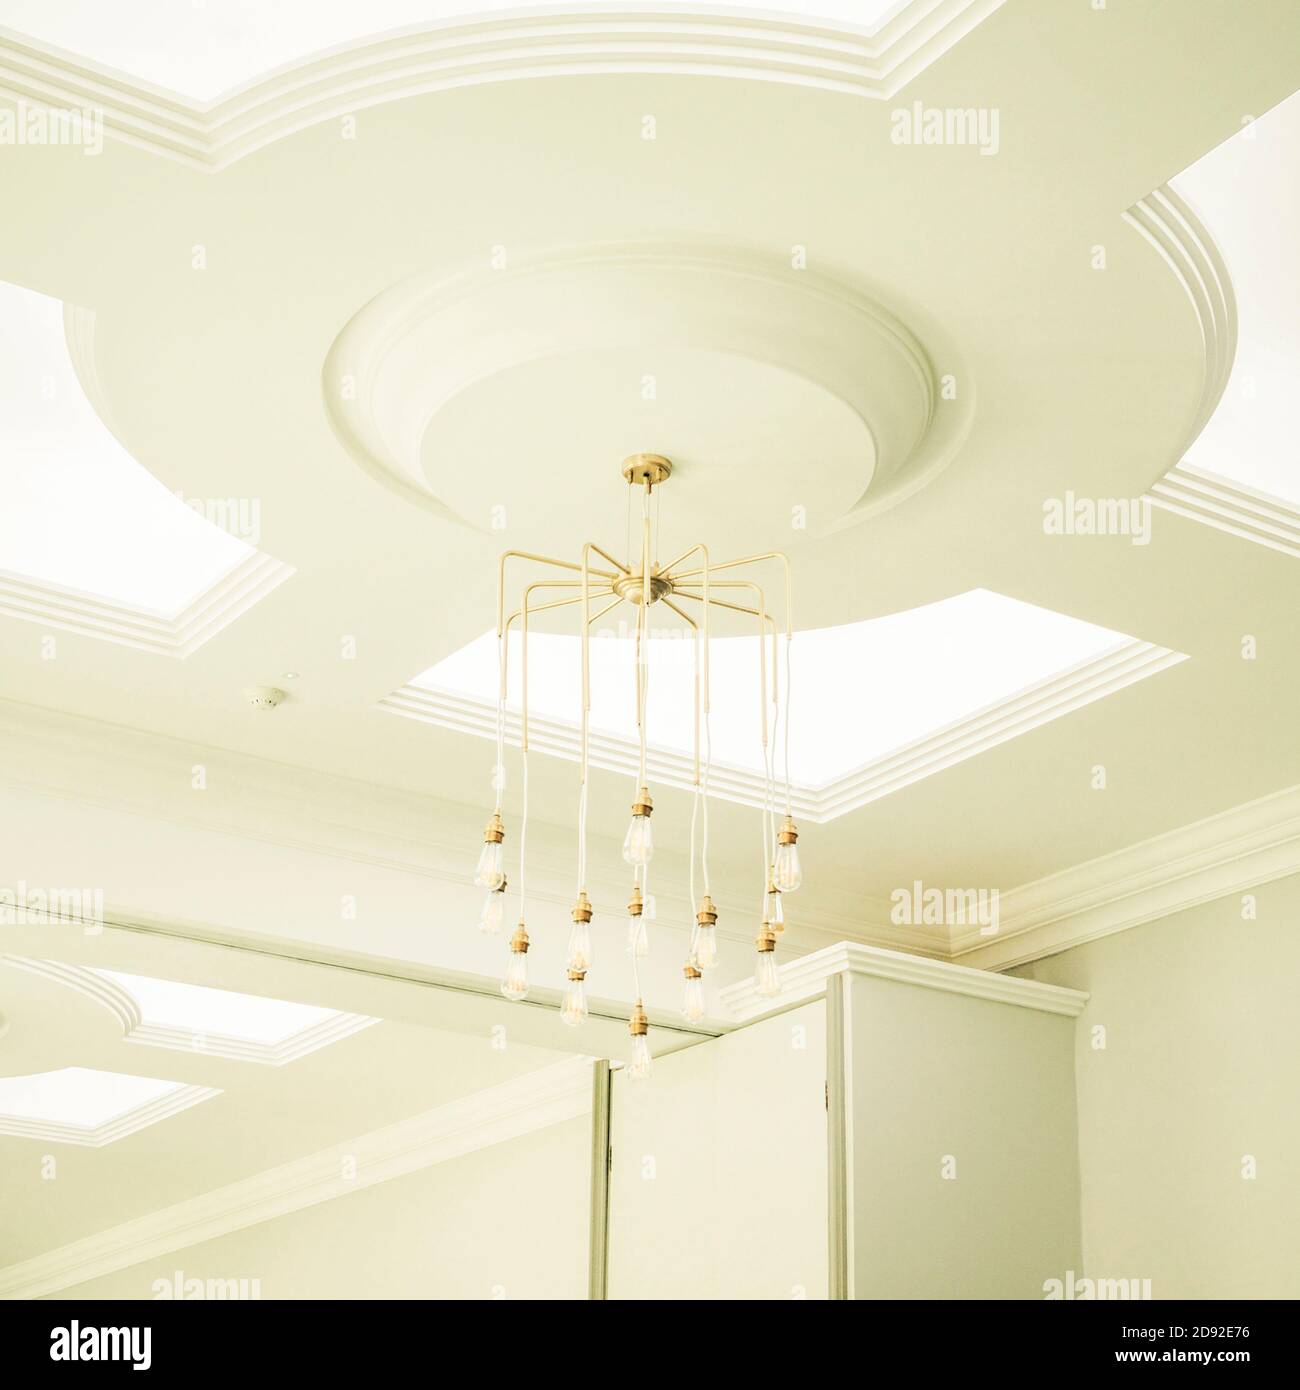 Light bulb chandelier hanging from ceiling Stock Photo